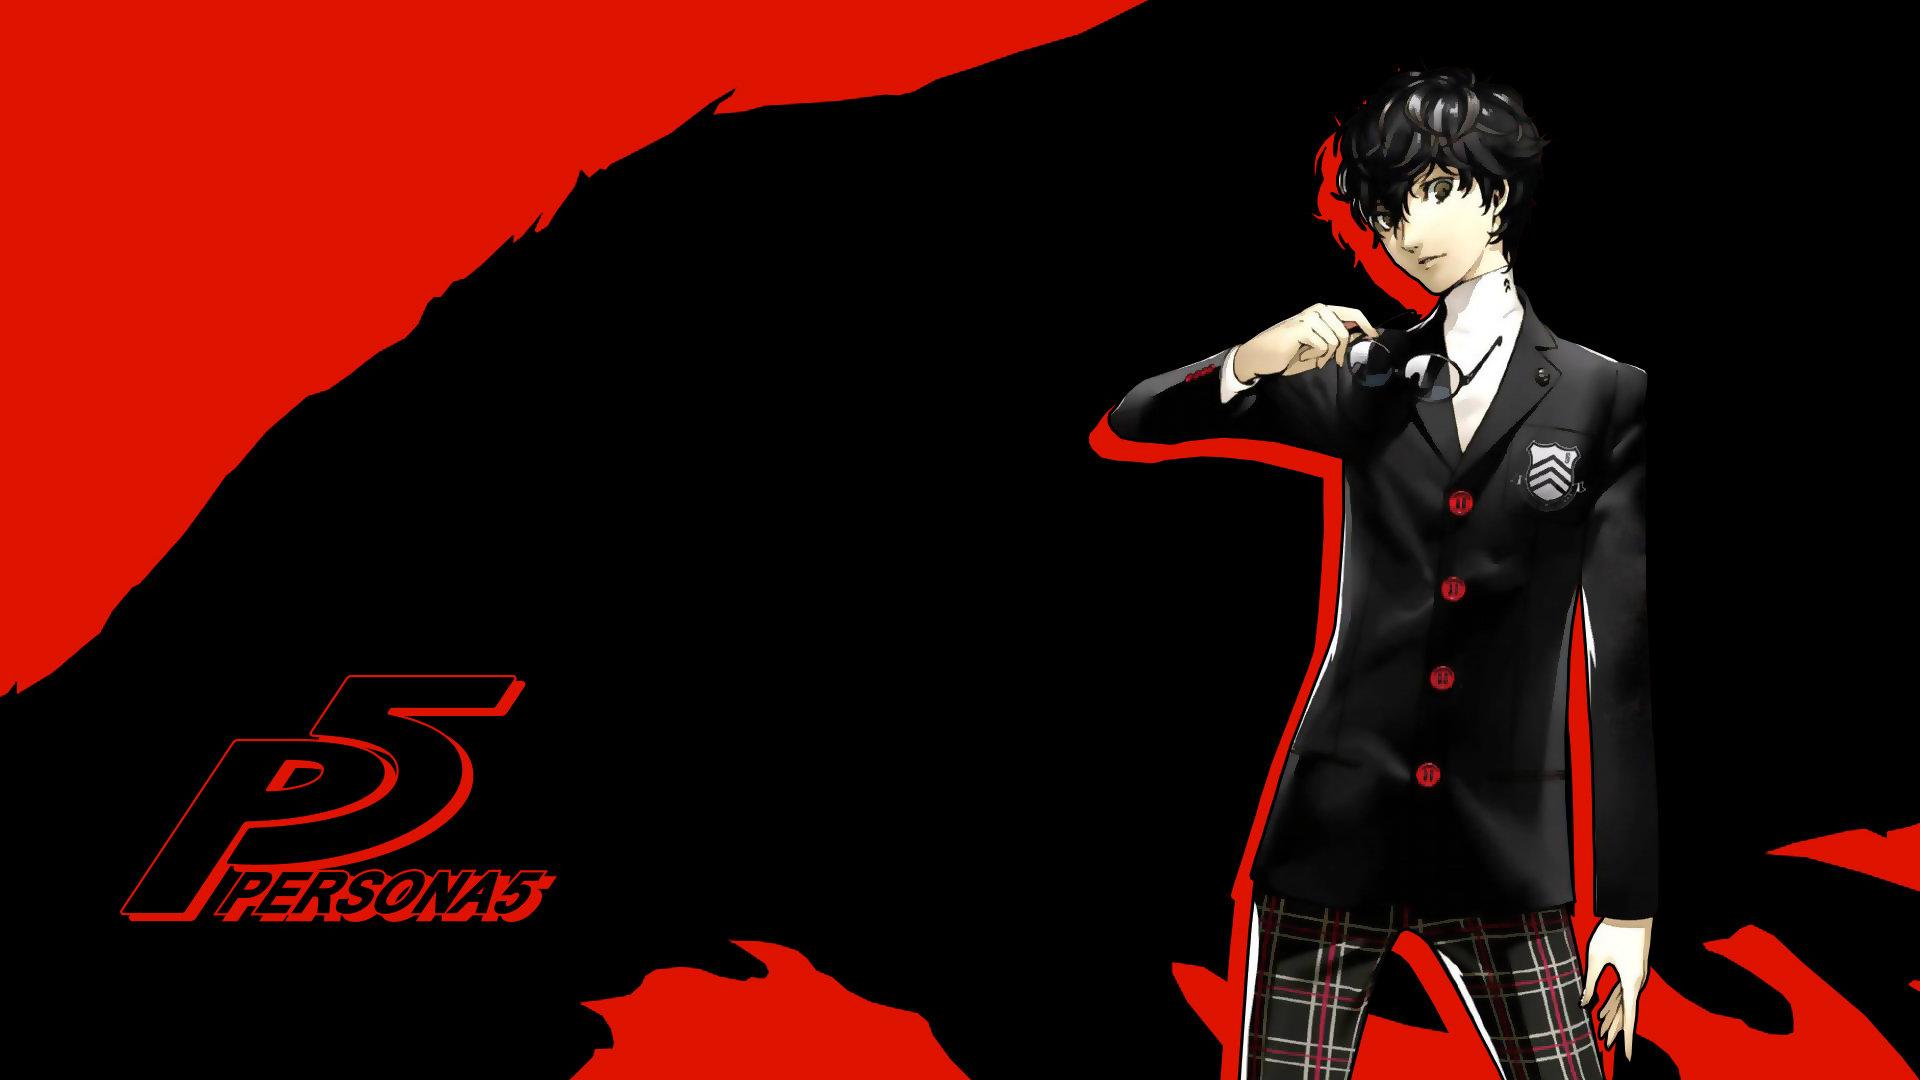 Awesome Persona 5 free wallpaper for HD 1920x1080